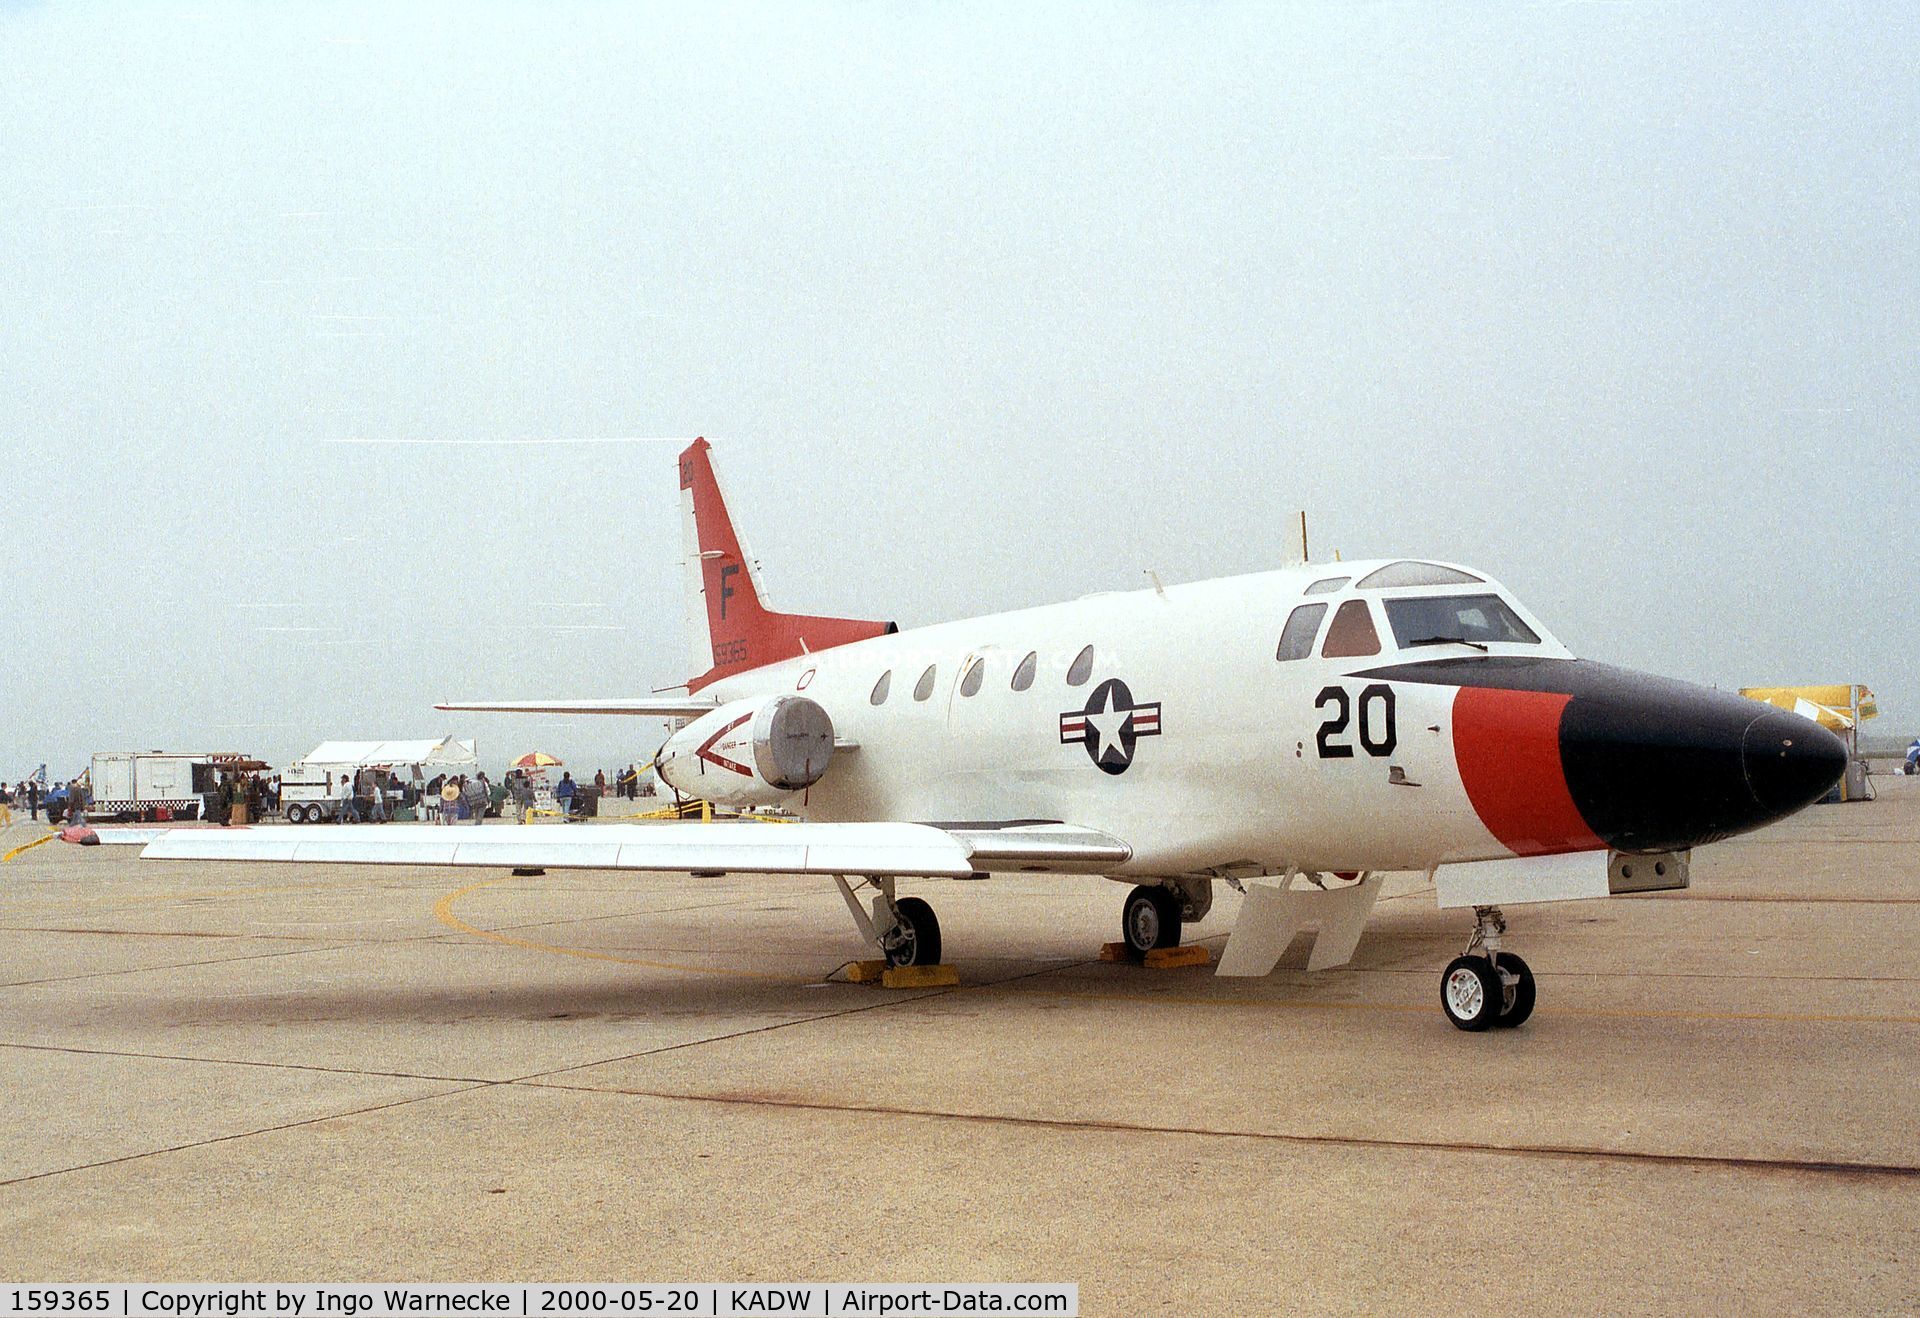 159365, North American Rockwell CT-39G Sabreliner C/N 306-70, North American Rockwell CT-39G Sabreliner of the US Navy at Andrews AFB during Armed Forces Day